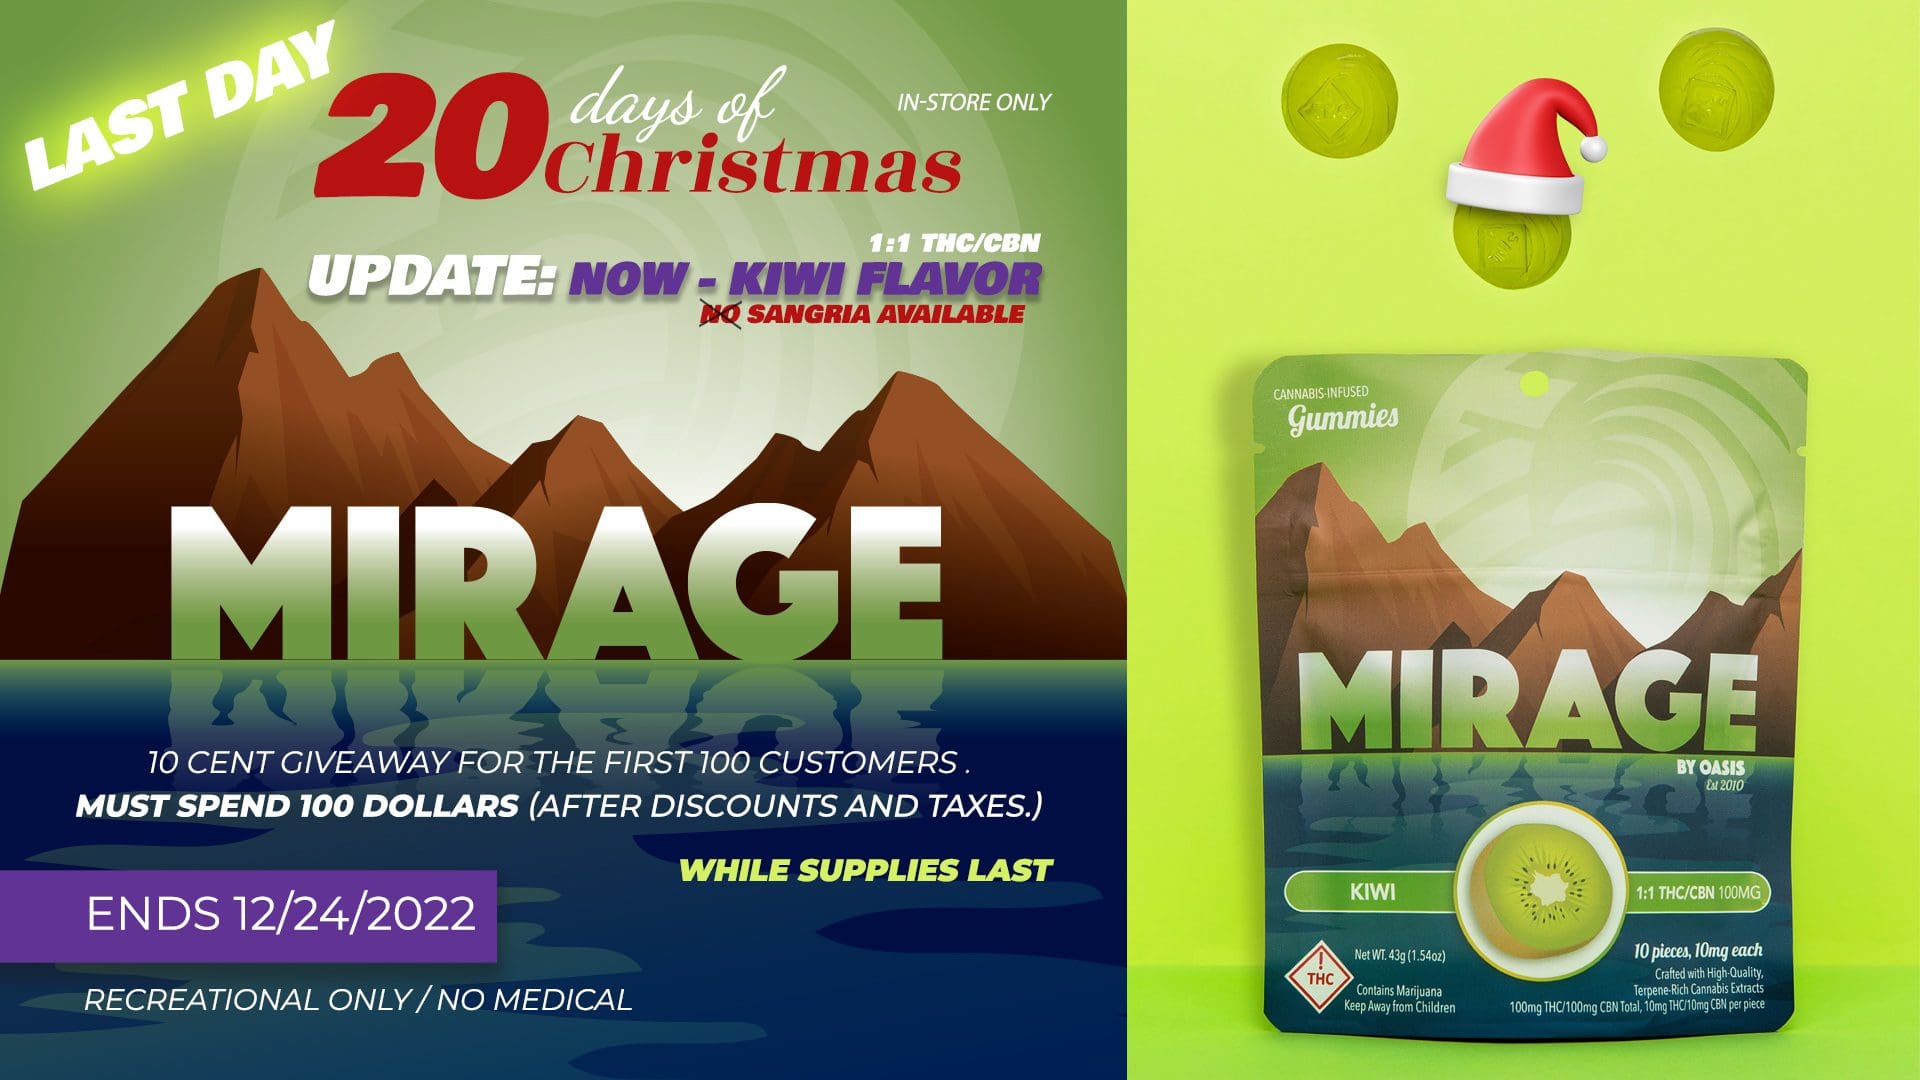 20 Days of Christmas deals end December 24th. 